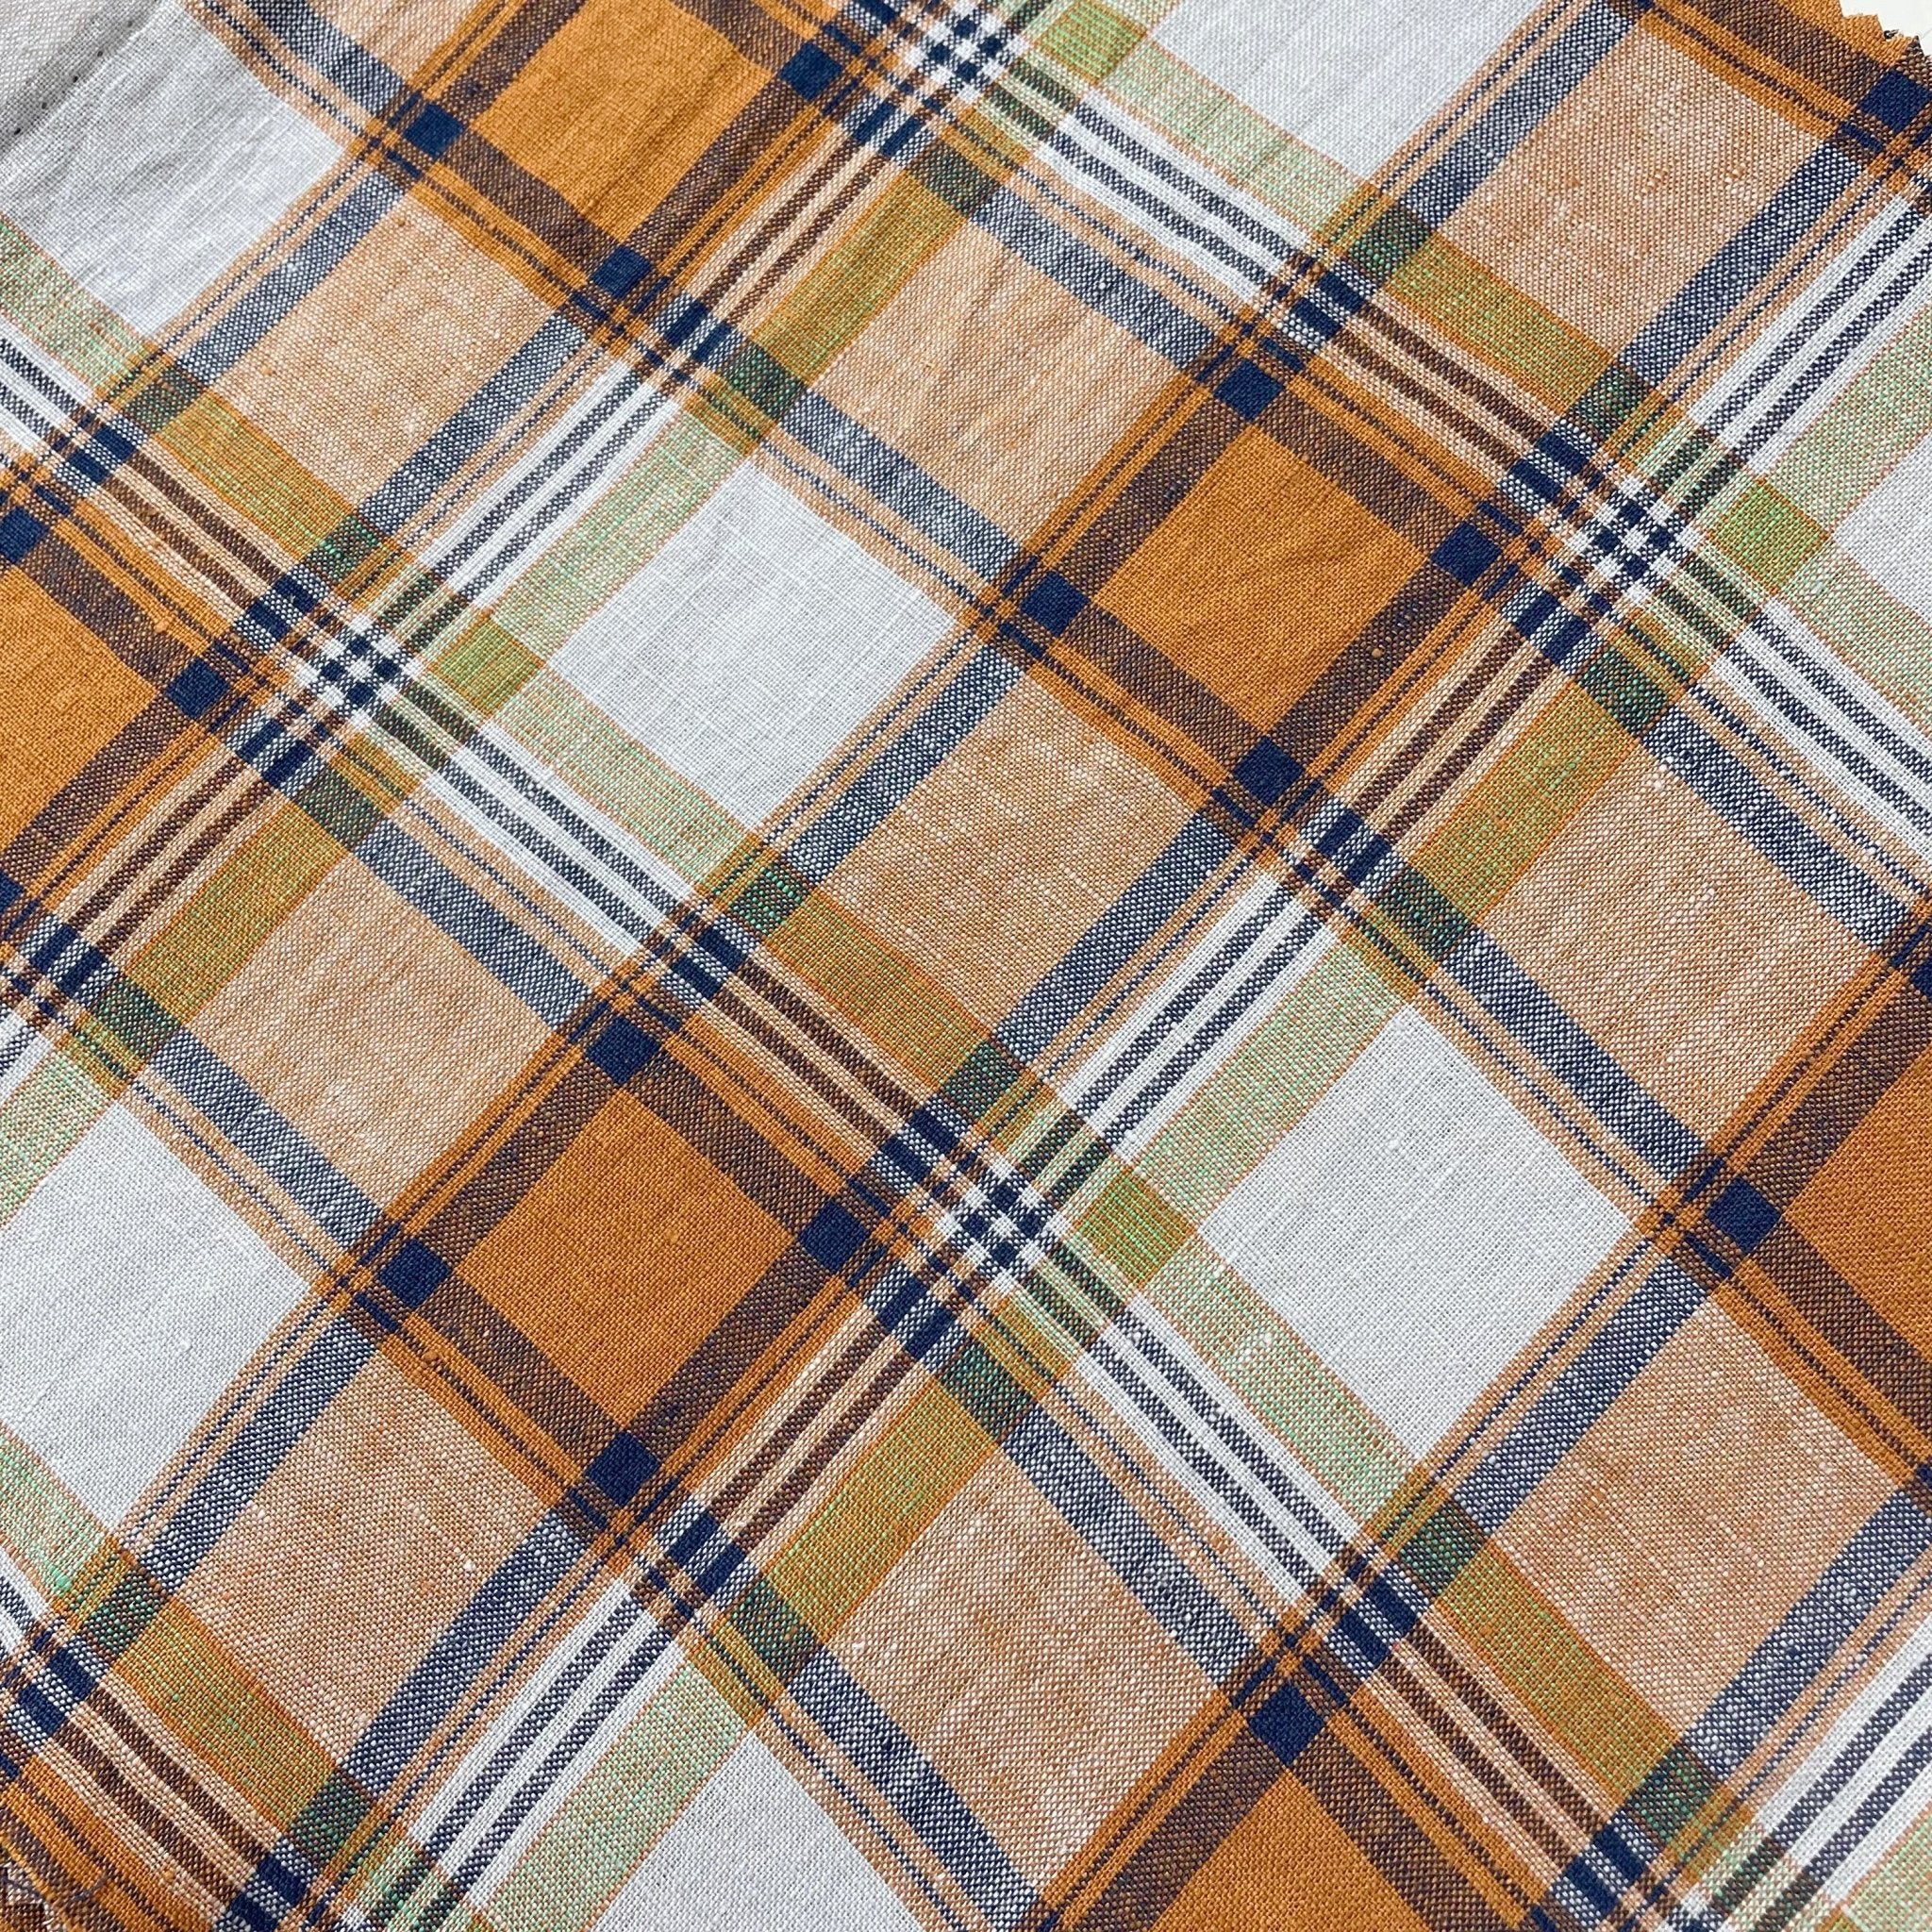 Linen Red Orange Big Check Fabric 7131 7130 - The Linen Lab - 7130 RED